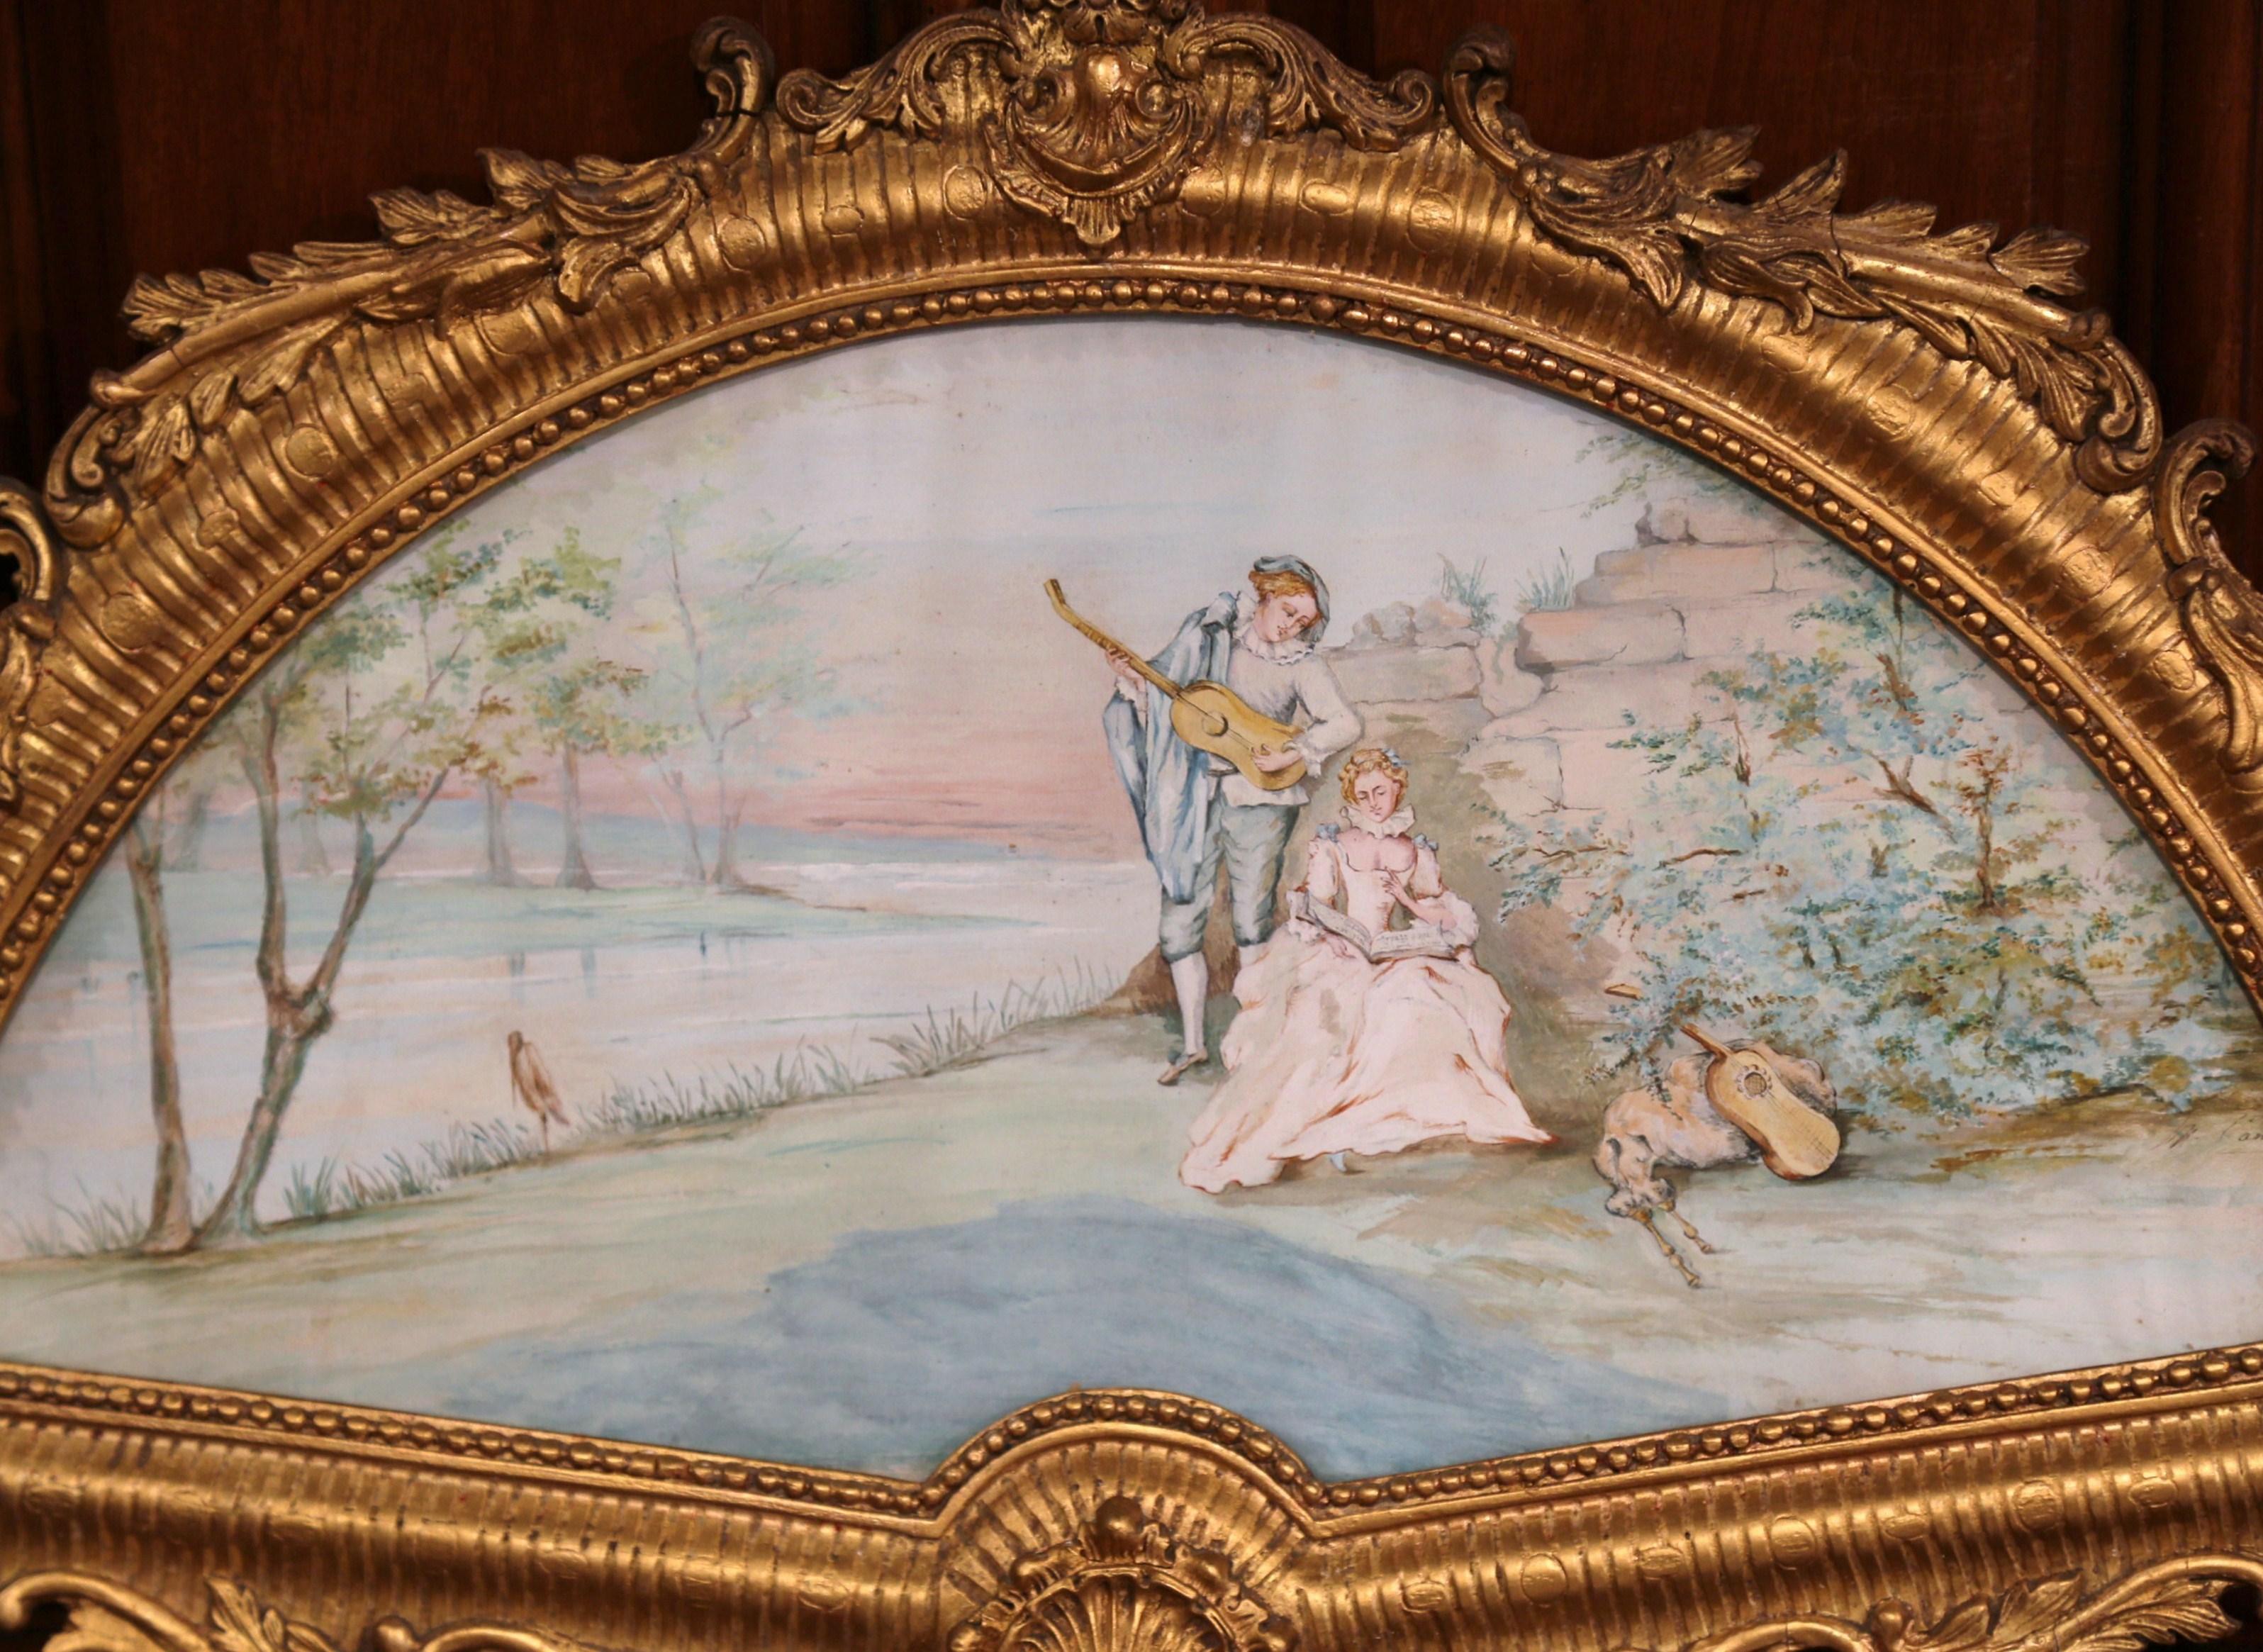 19th Century French Watercolor Courting Scene in Carved Gilt Frame Signed Canoby - Art by Unknown